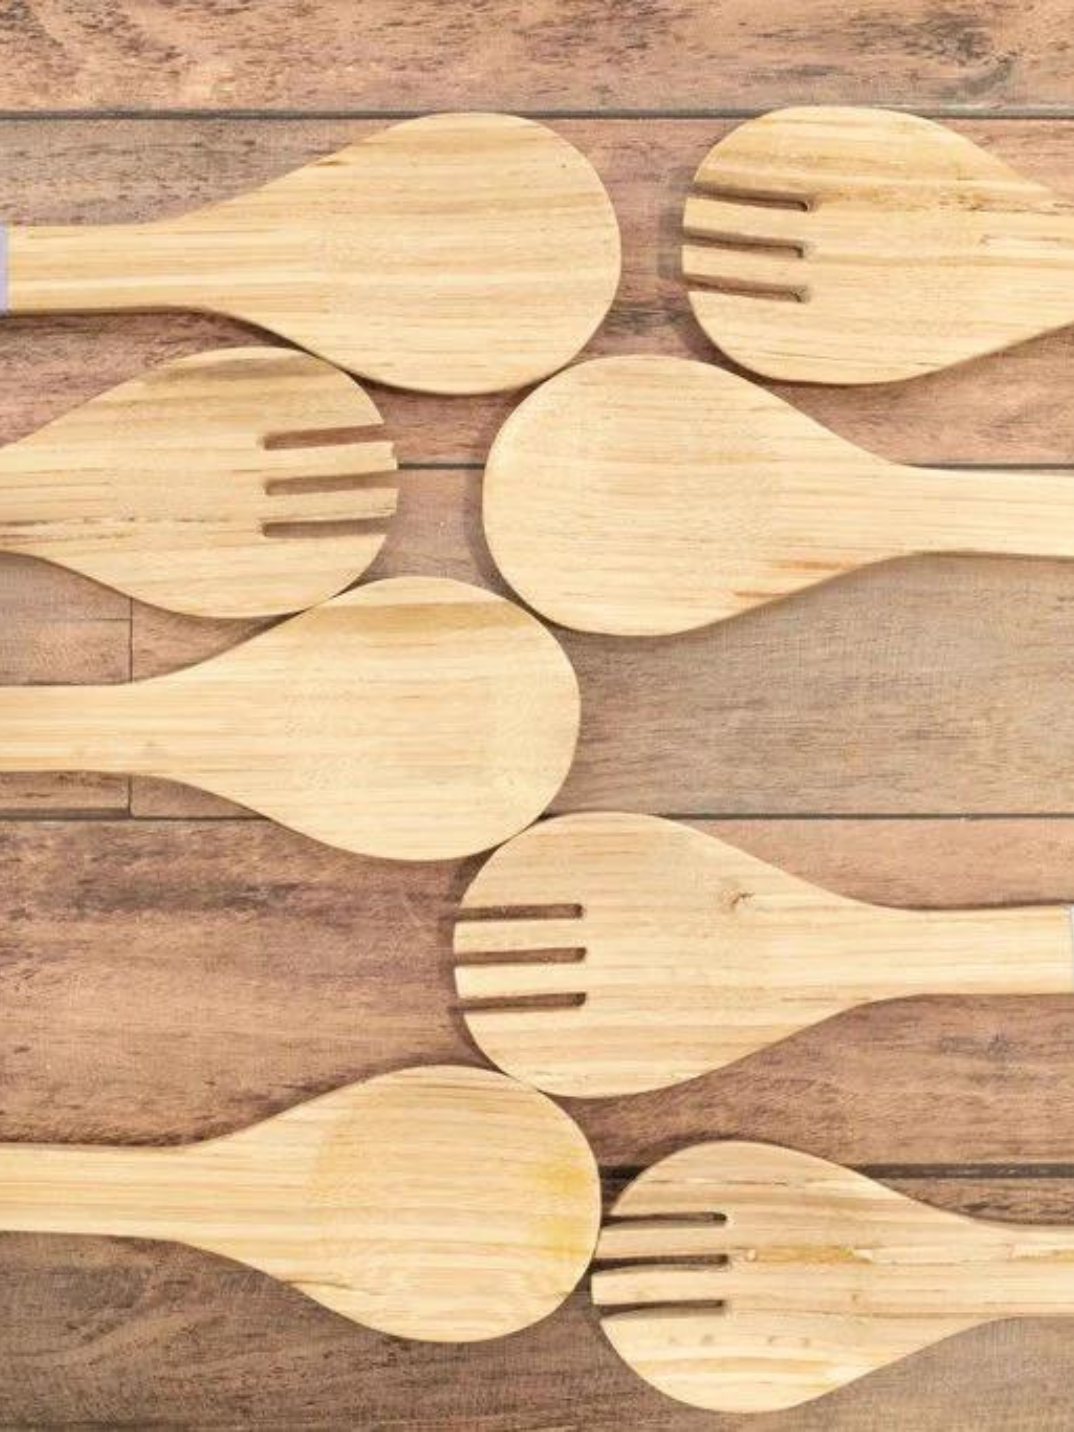 These fair trade bamboo serving utensils are great for both entertaining and everyday use. Editors' notes: Hand shaped by a women's group using local bamboo in a Vietnamese village, this bamboo serving utensils are produced to the highest environmental and social standards. 100% natural, high quality, ethically-made, and eco-friendly.